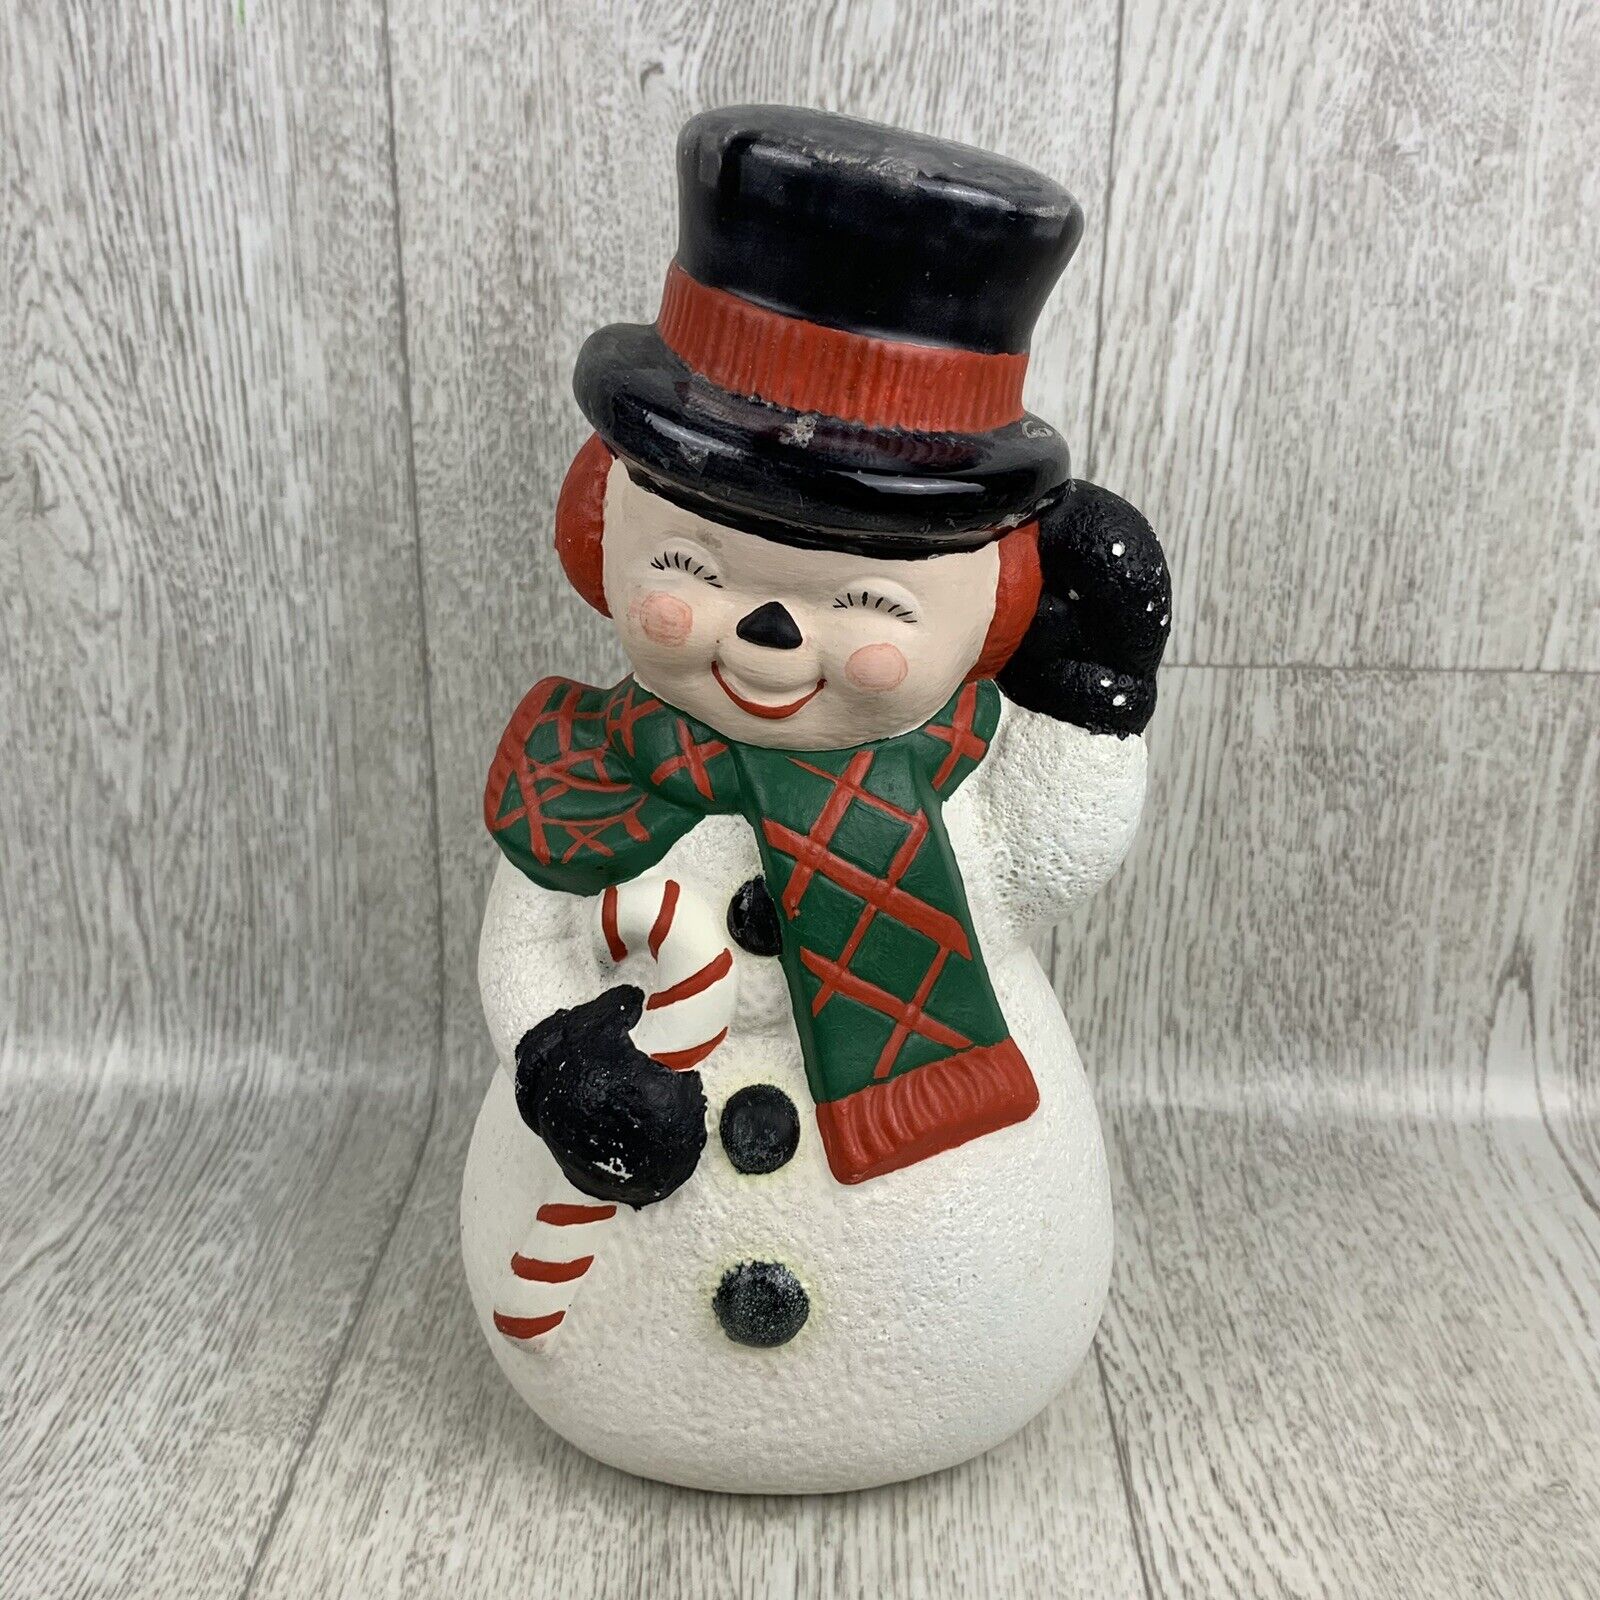 Vintage 1970s Christmas Ceramic Mold Frosty Snowman Figurine Dimpled Snow 12 “